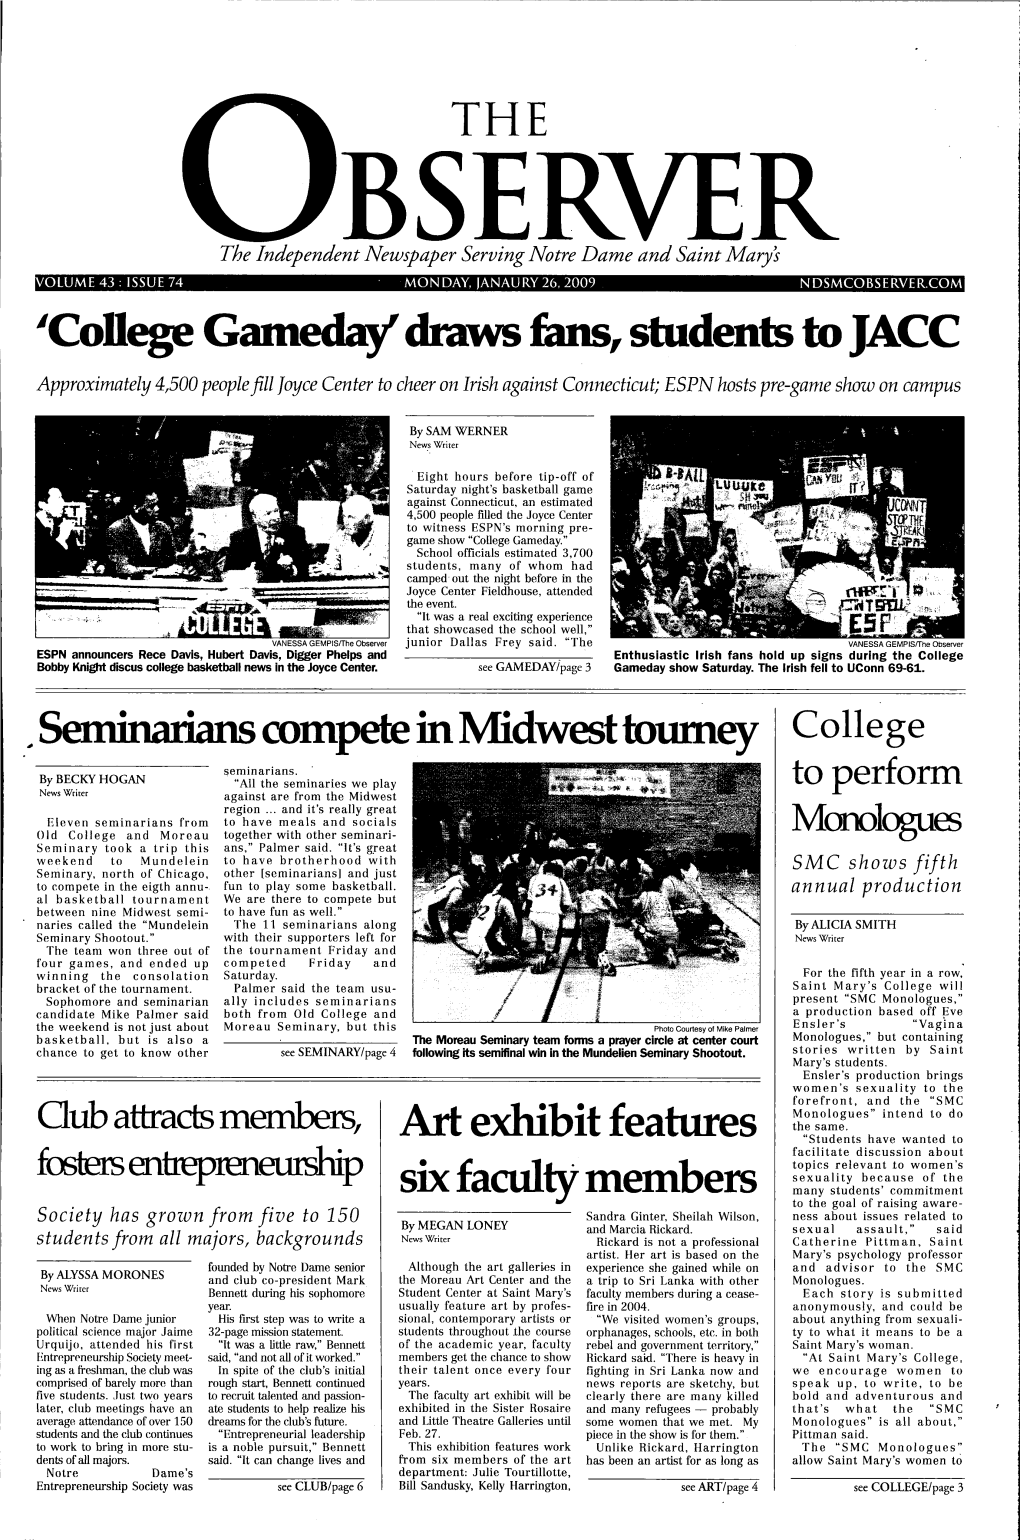 ~College Gameday' Draws Fans, Students to JACC Approximately 4,500 People Fill Joyce Center to Cheer on Irish Against Connecticut; ESPN Hosts Pre-Game Show on Campus